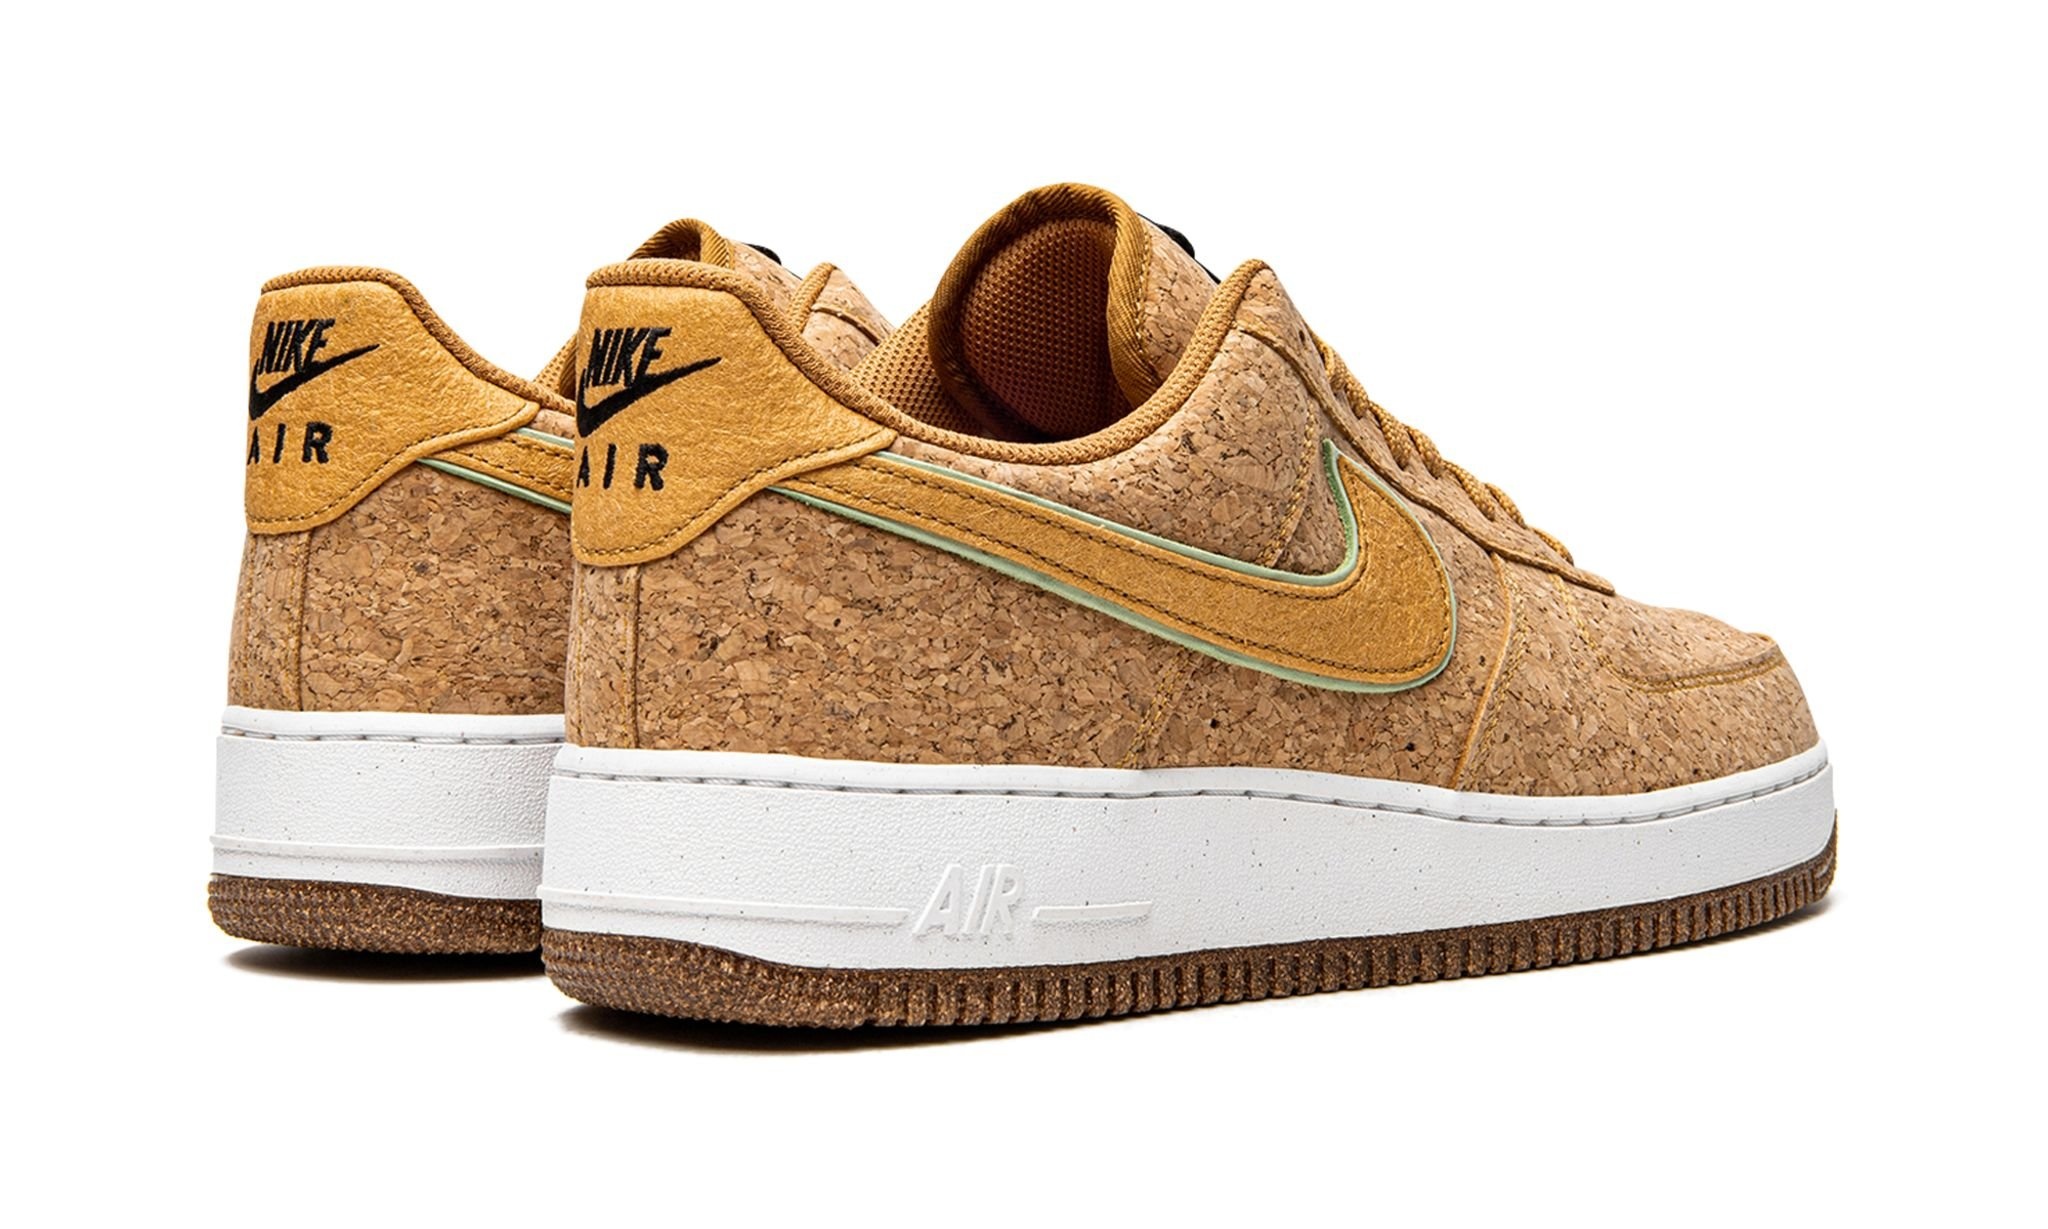 Air Force 1 Low "Happy Pineapple" - 3